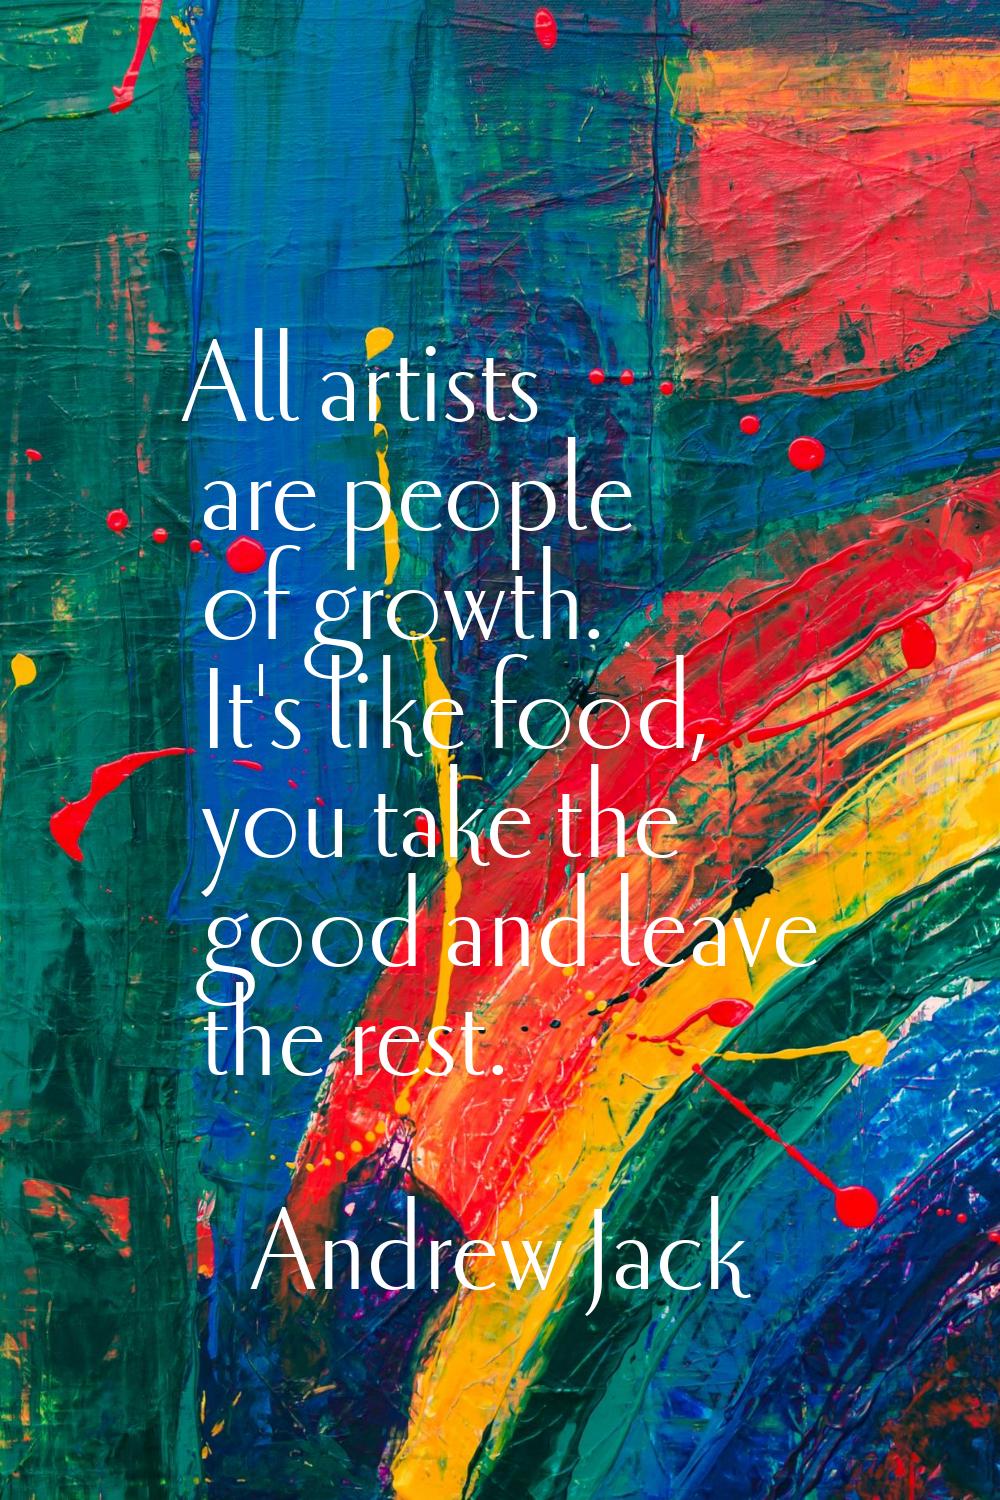 All artists are people of growth. It's like food, you take the good and leave the rest.